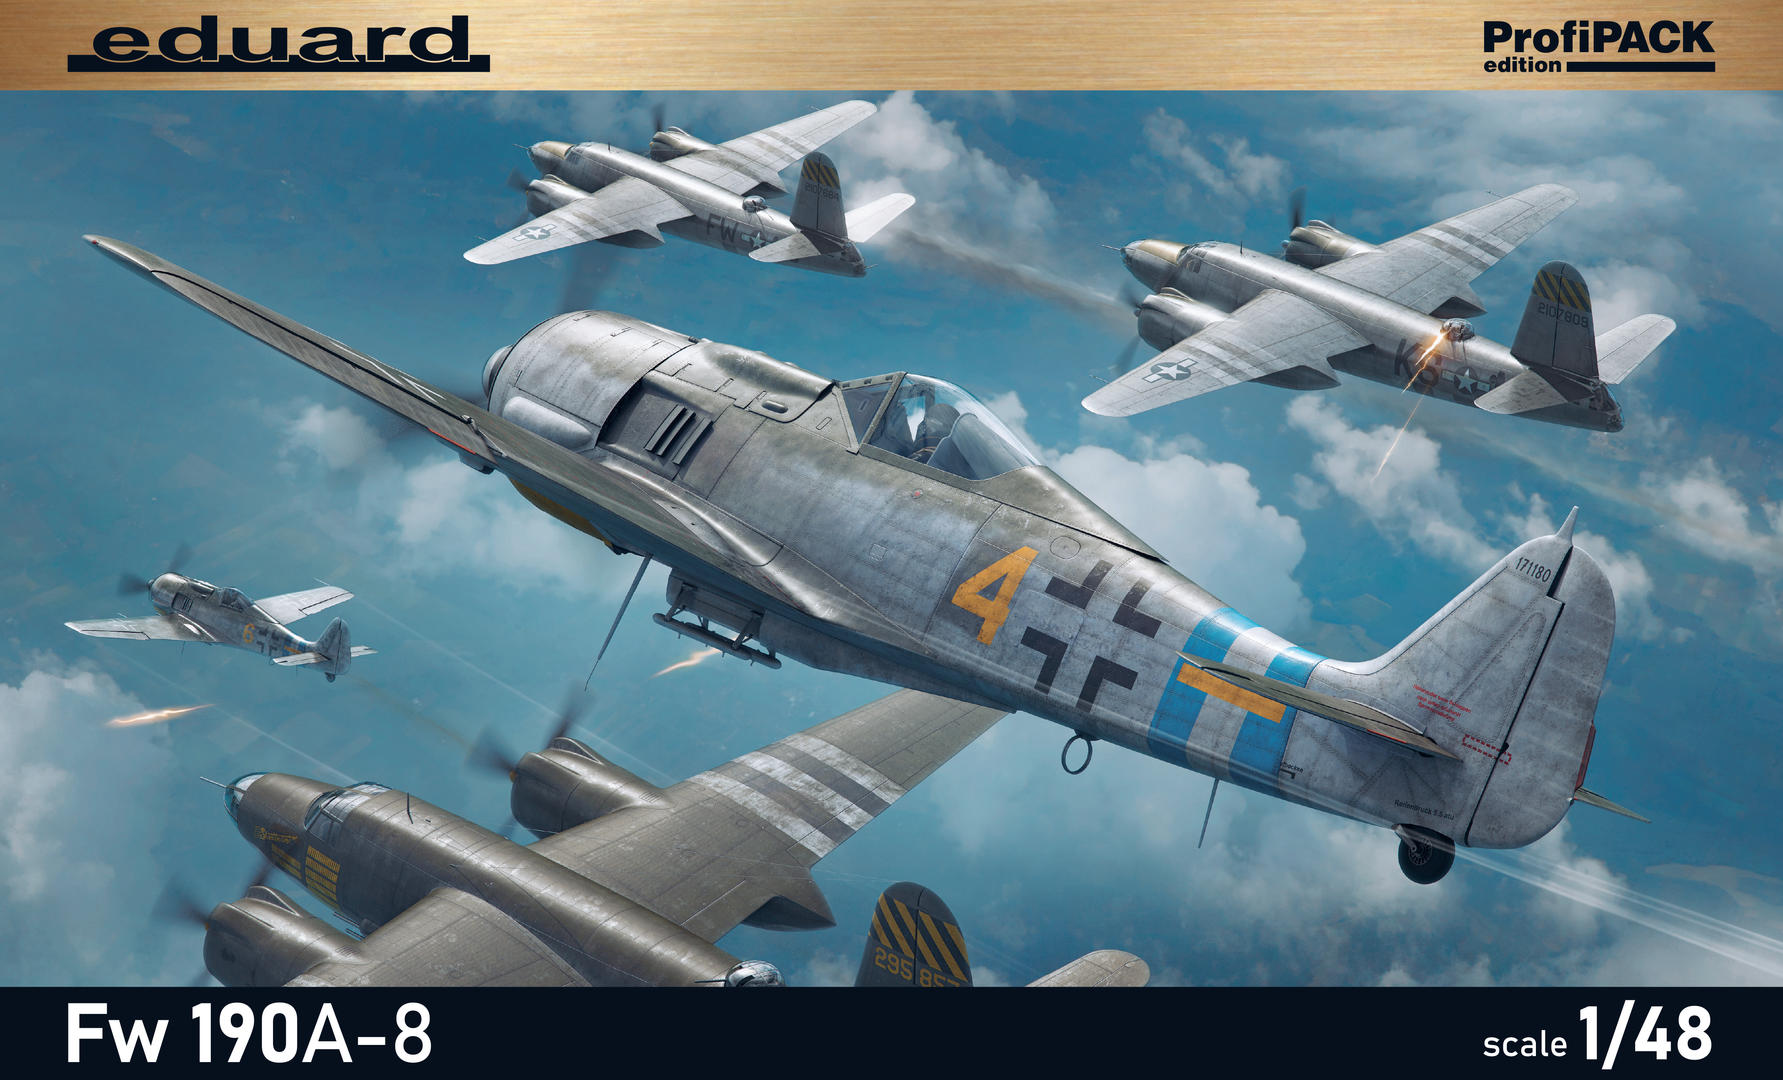 AIRES 4314 Wheel Bay for Eduard Kit Fw190A-8 in 1:48 